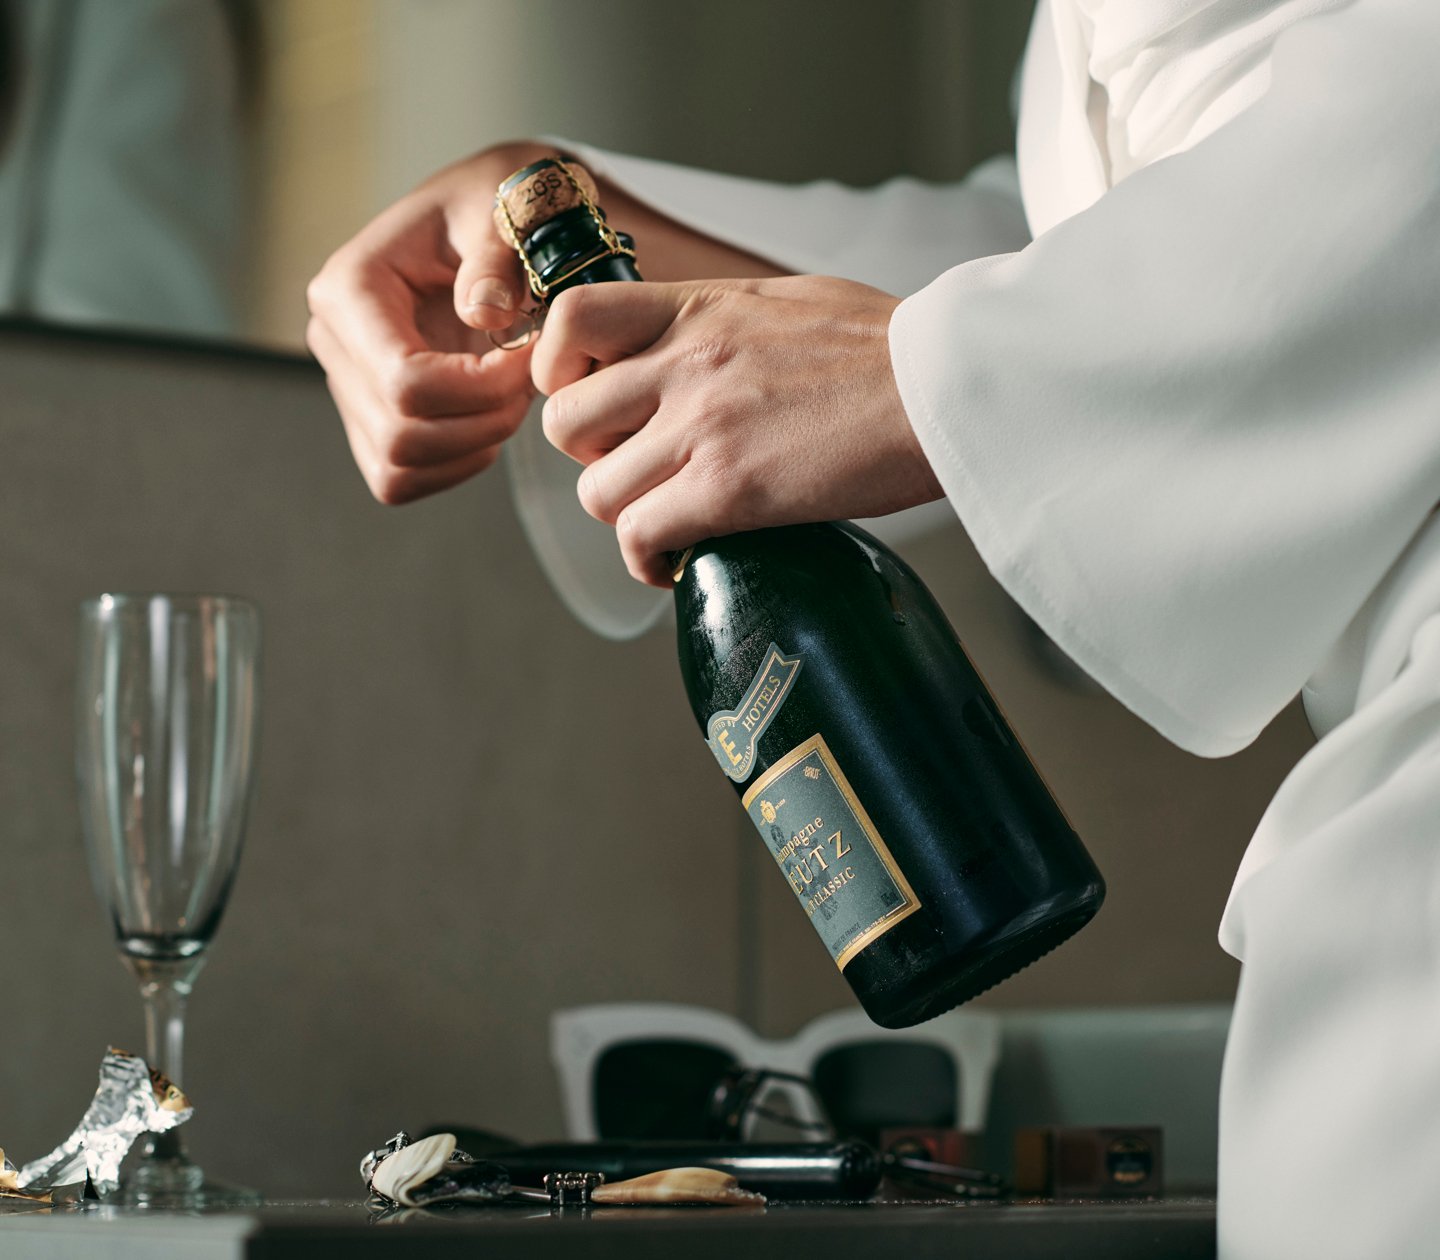 Waiter opens a champagne bottle